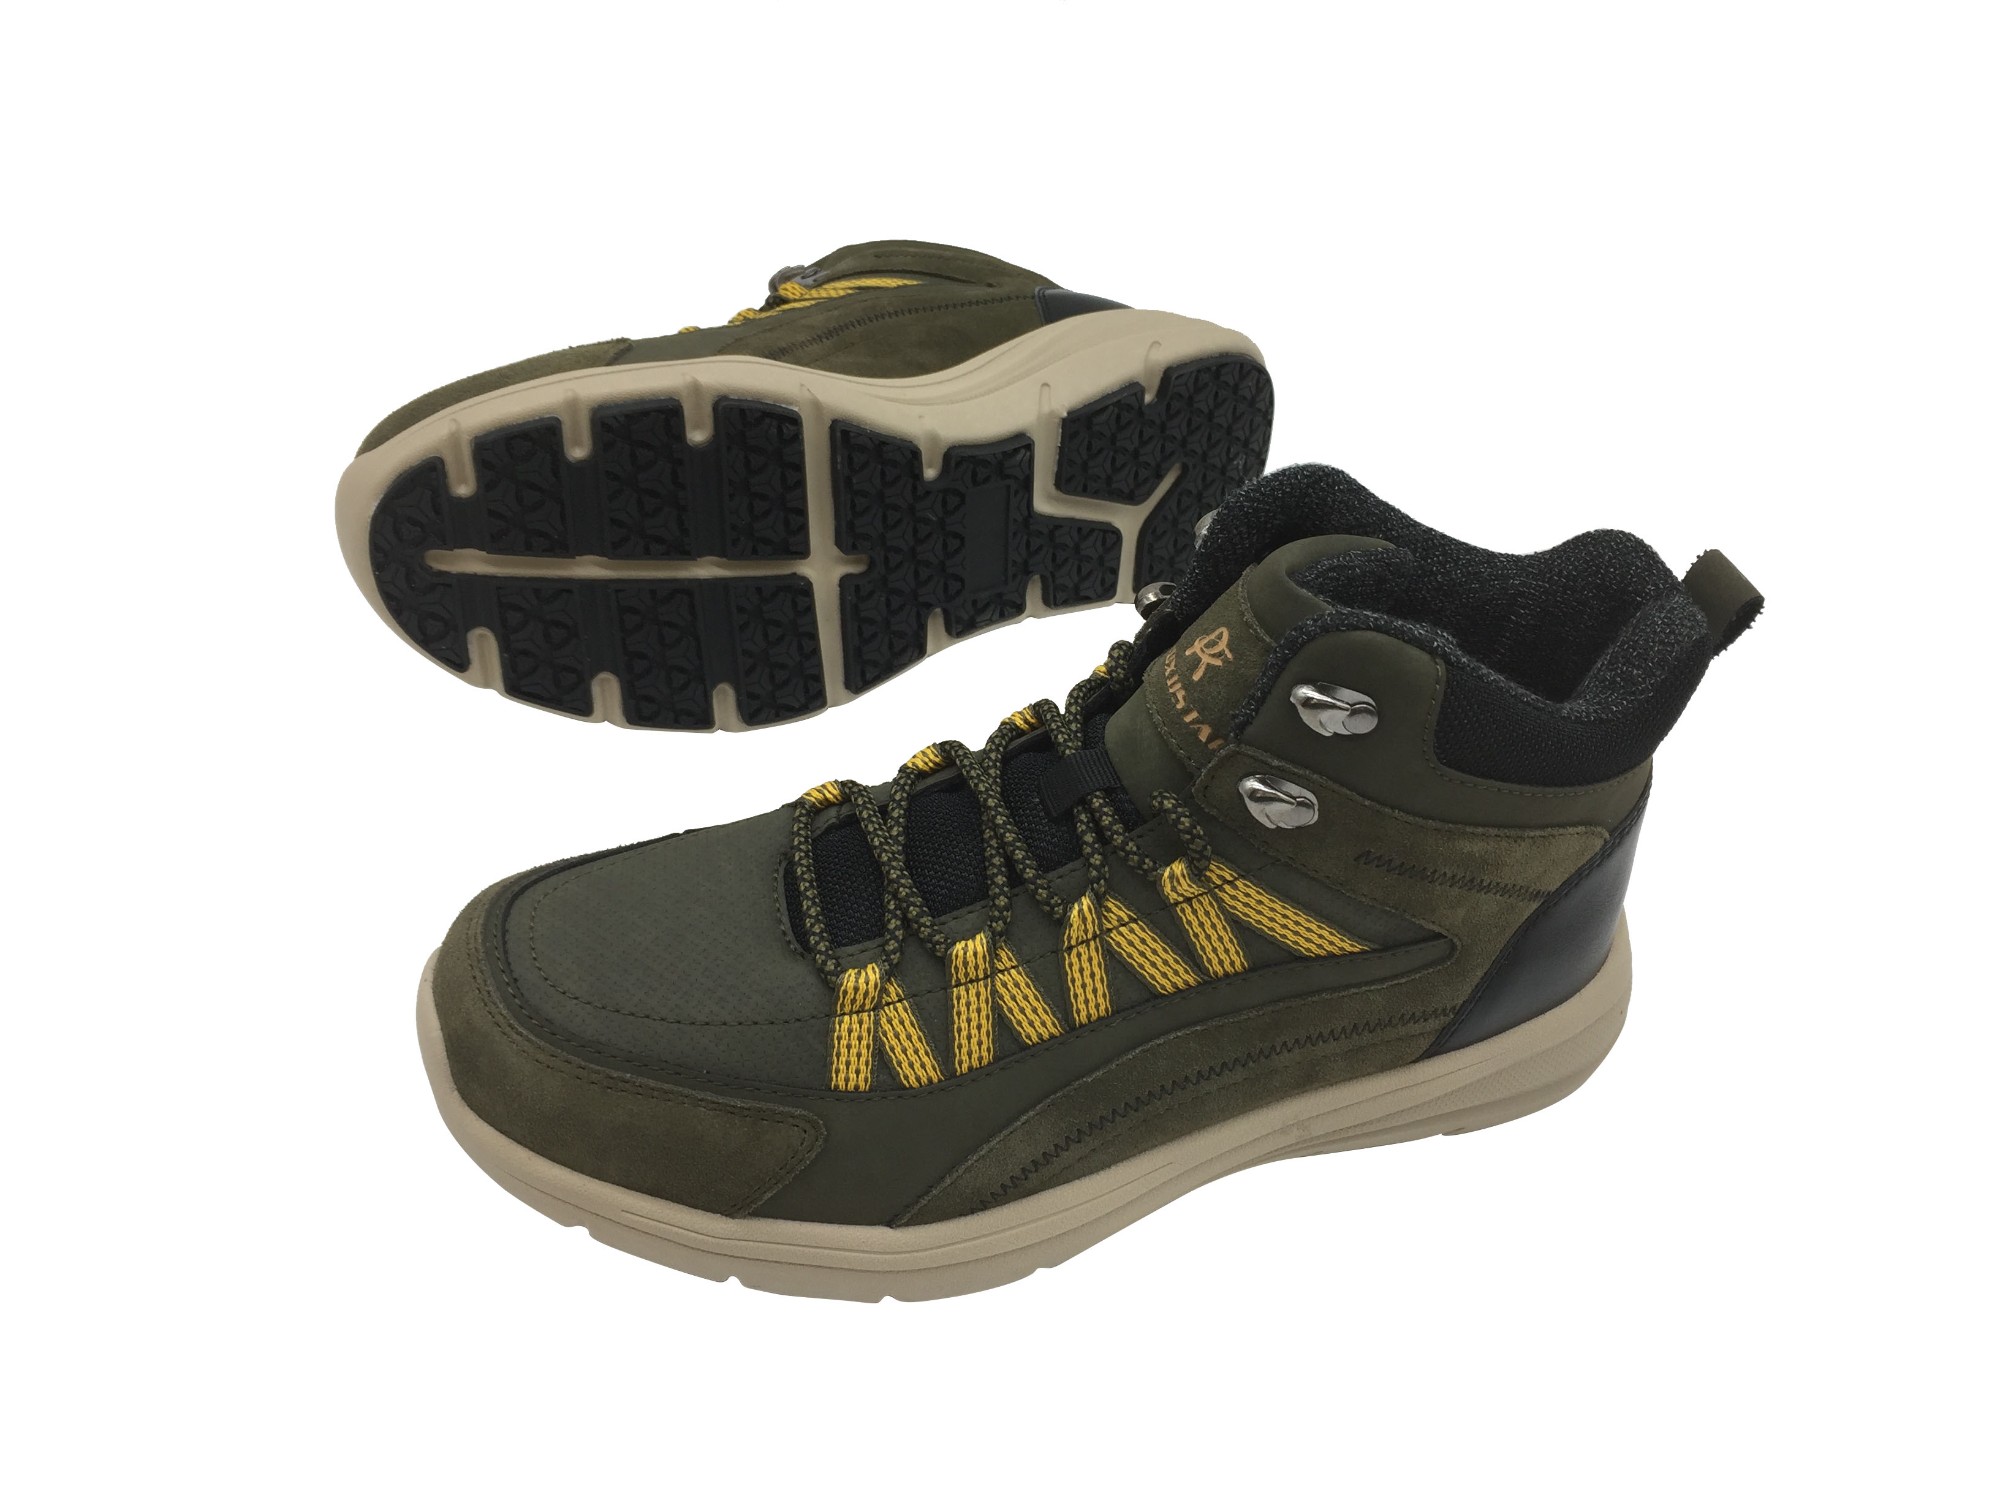 High Quality Hiking Boots Men's Treker Shoes Outdoor Trekking Shoes For Men Manufacturers, High Quality Hiking Boots Men's Treker Shoes Outdoor Trekking Shoes For Men Factory, Supply High Quality Hiking Boots Men's Treker Shoes Outdoor Trekking Shoes For Men